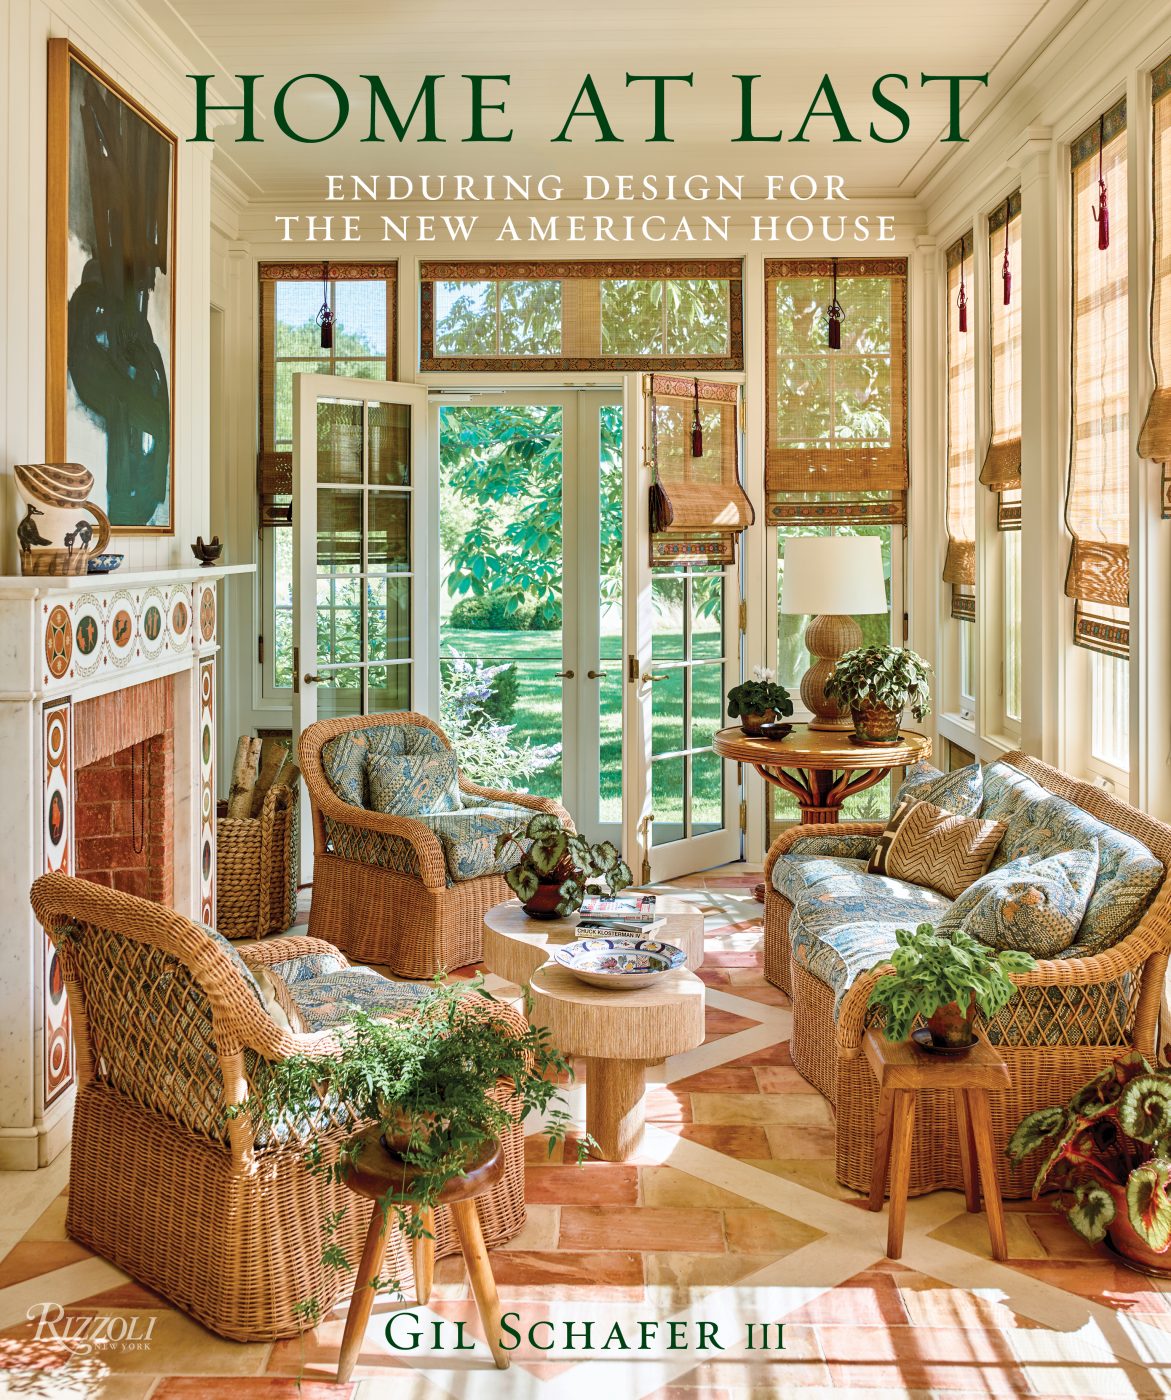 Cover of Gil Schafer III's new book Home at Last: Enduring Design for the New American Home Rizzoli publisher written with Mark Kristal